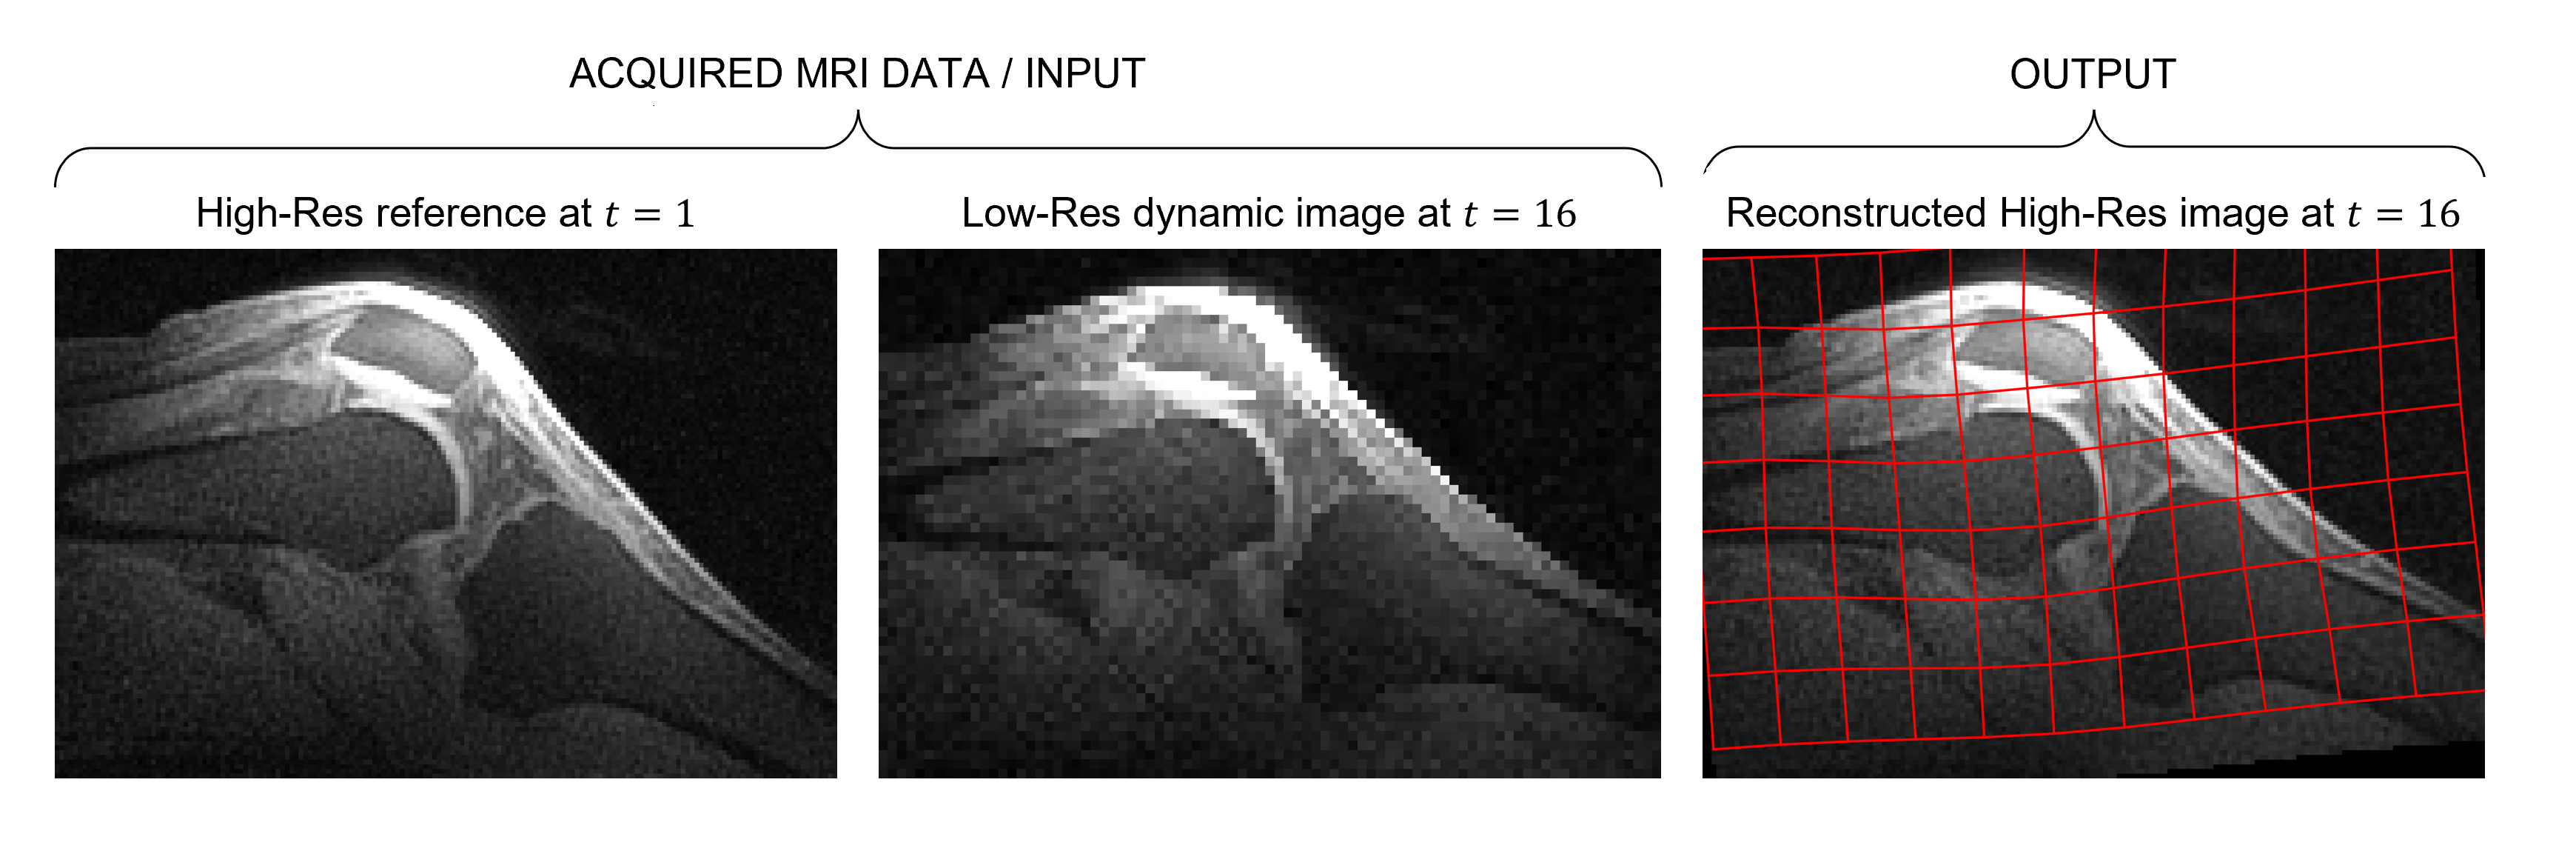 Acquired MRI knee data and its reconstruction. The reconstructed image is overlaid with a grid which represents how the HR reference image was deformed to align with corresponding LR dynamic time frame.